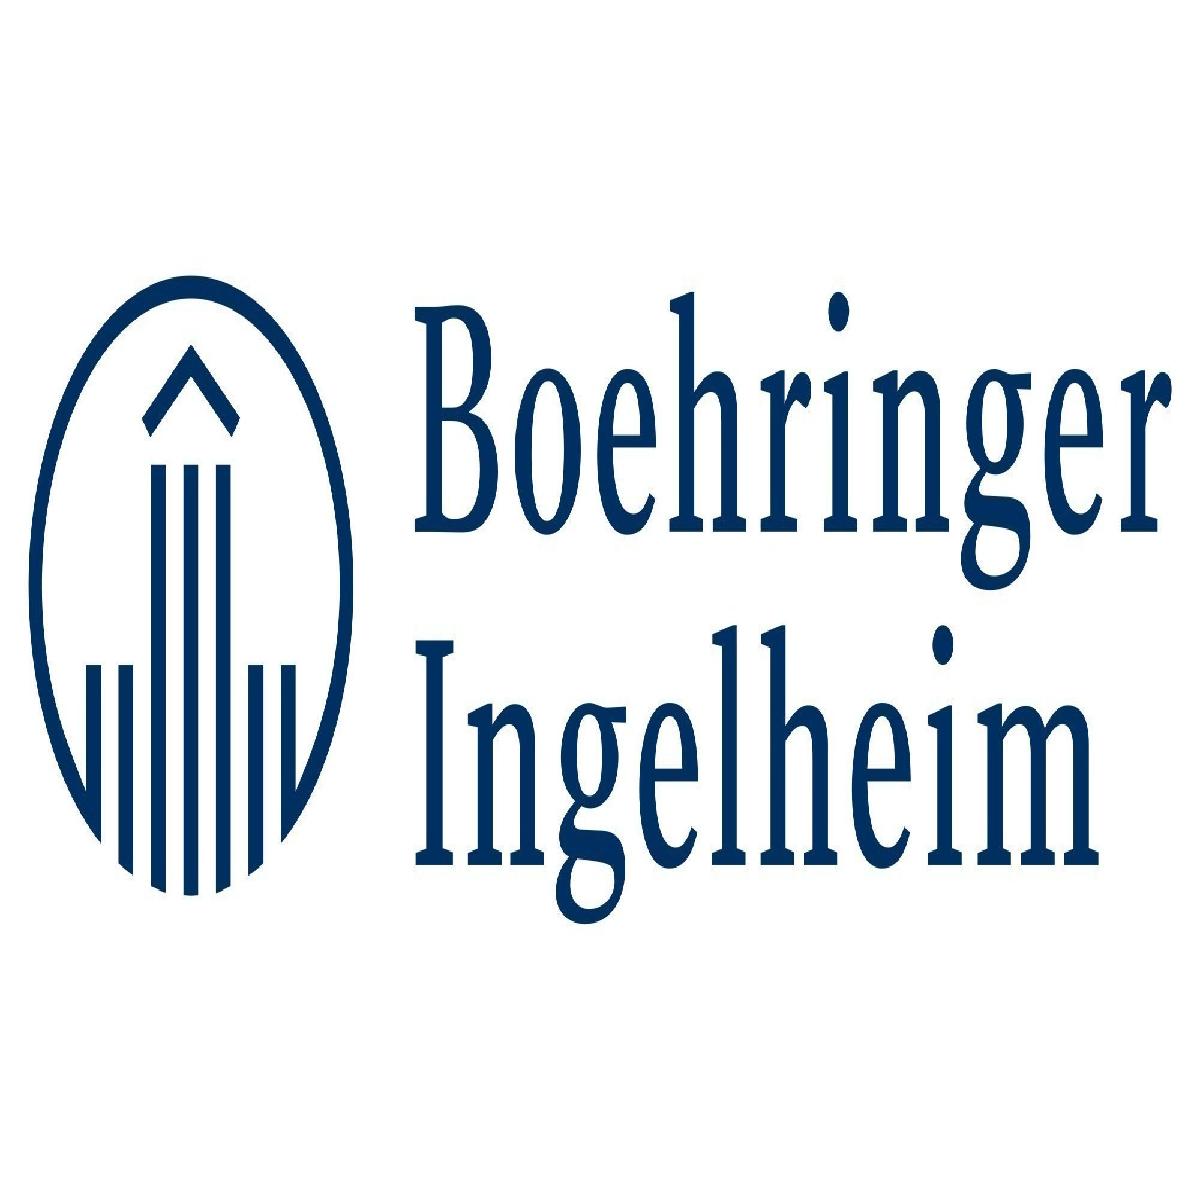 New data from Boehringer Ingelheim support the potential use of nintedanib in children and adolescents with fibrosing interstitial lung disease